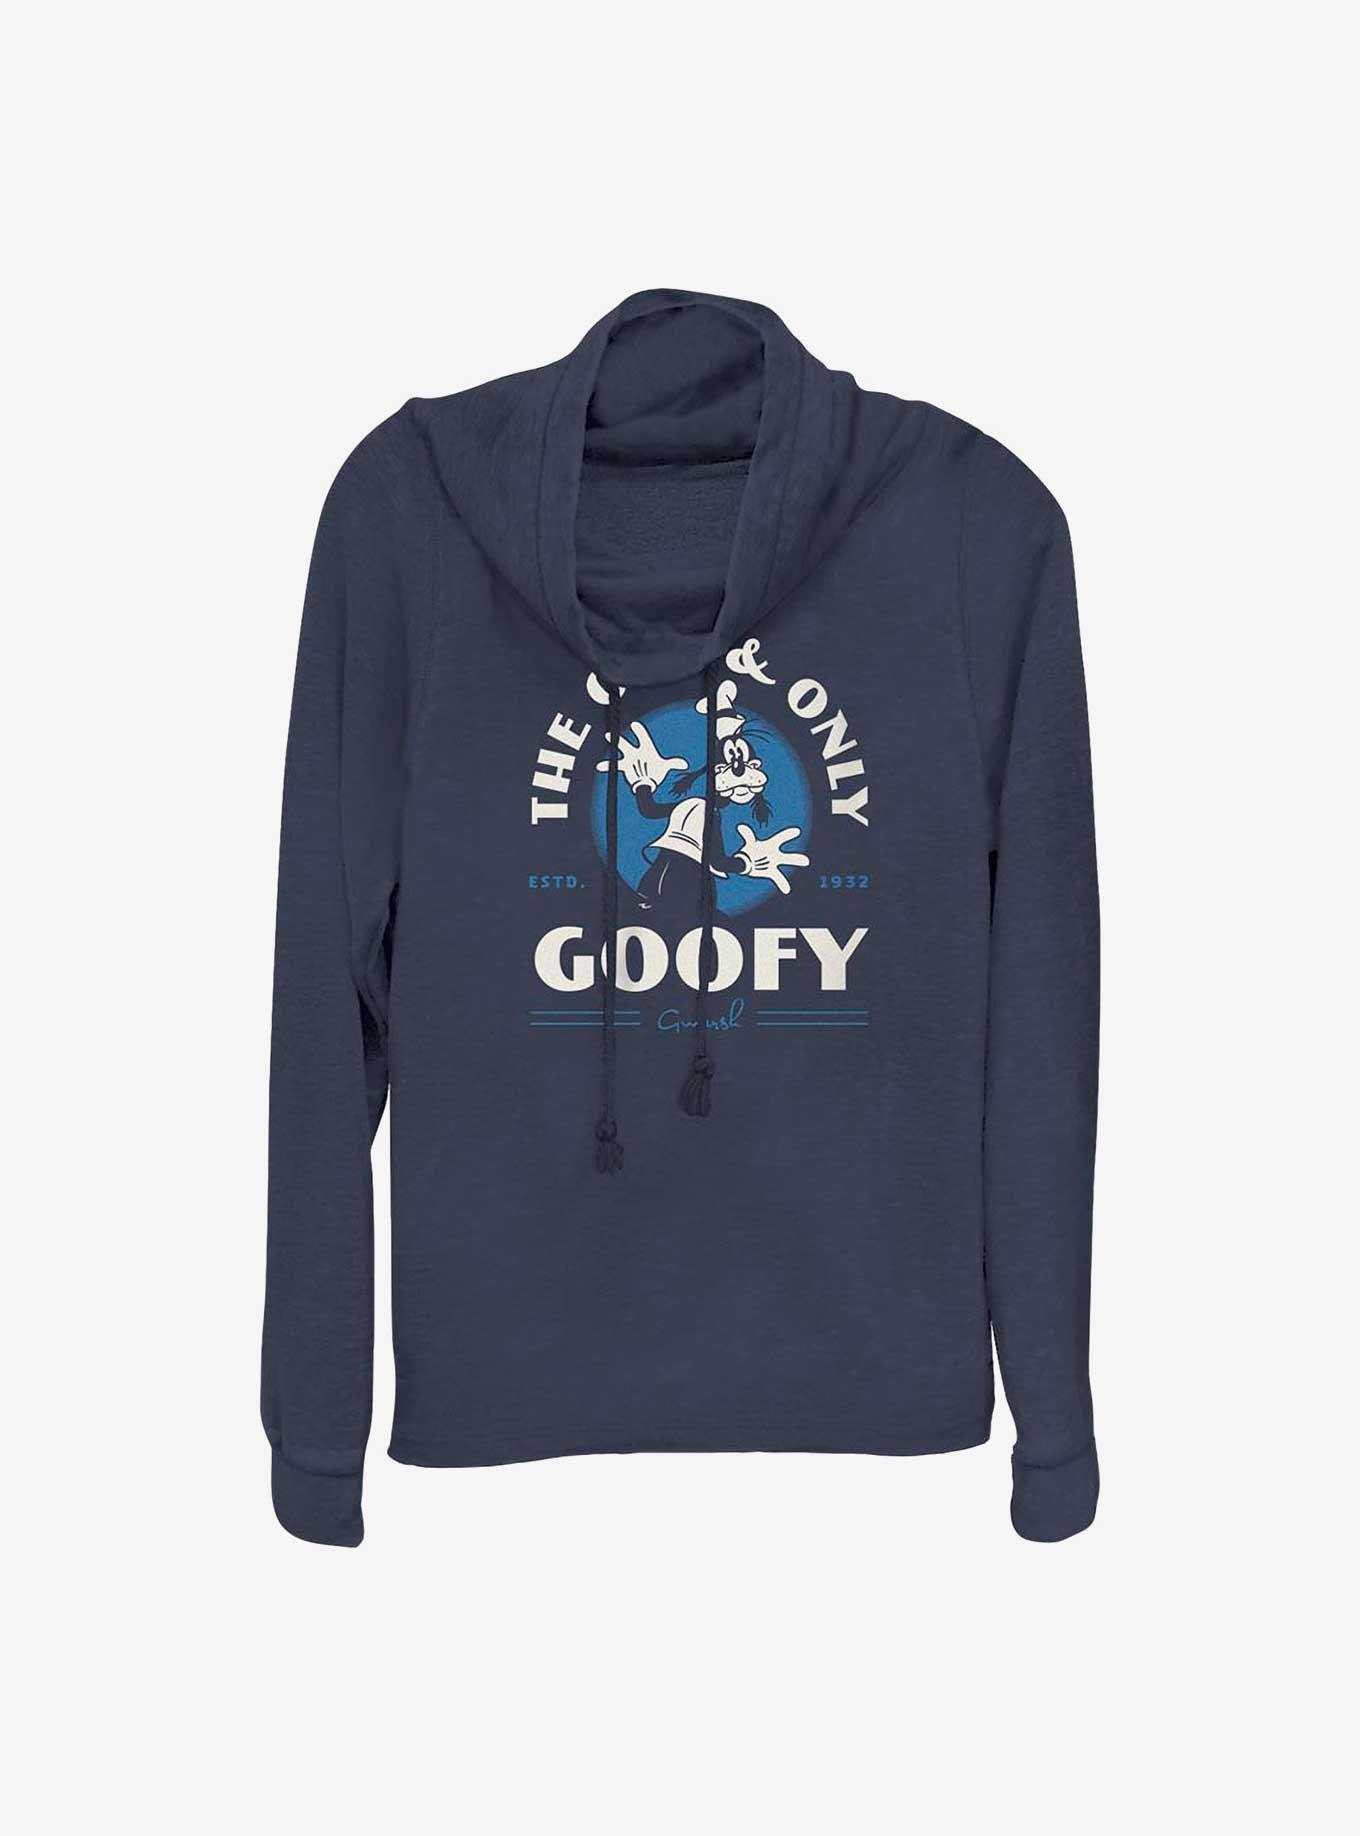 Disney 100 The One & Only Goofy Cowl Neck Long-Sleeve Top, NAVY, hi-res